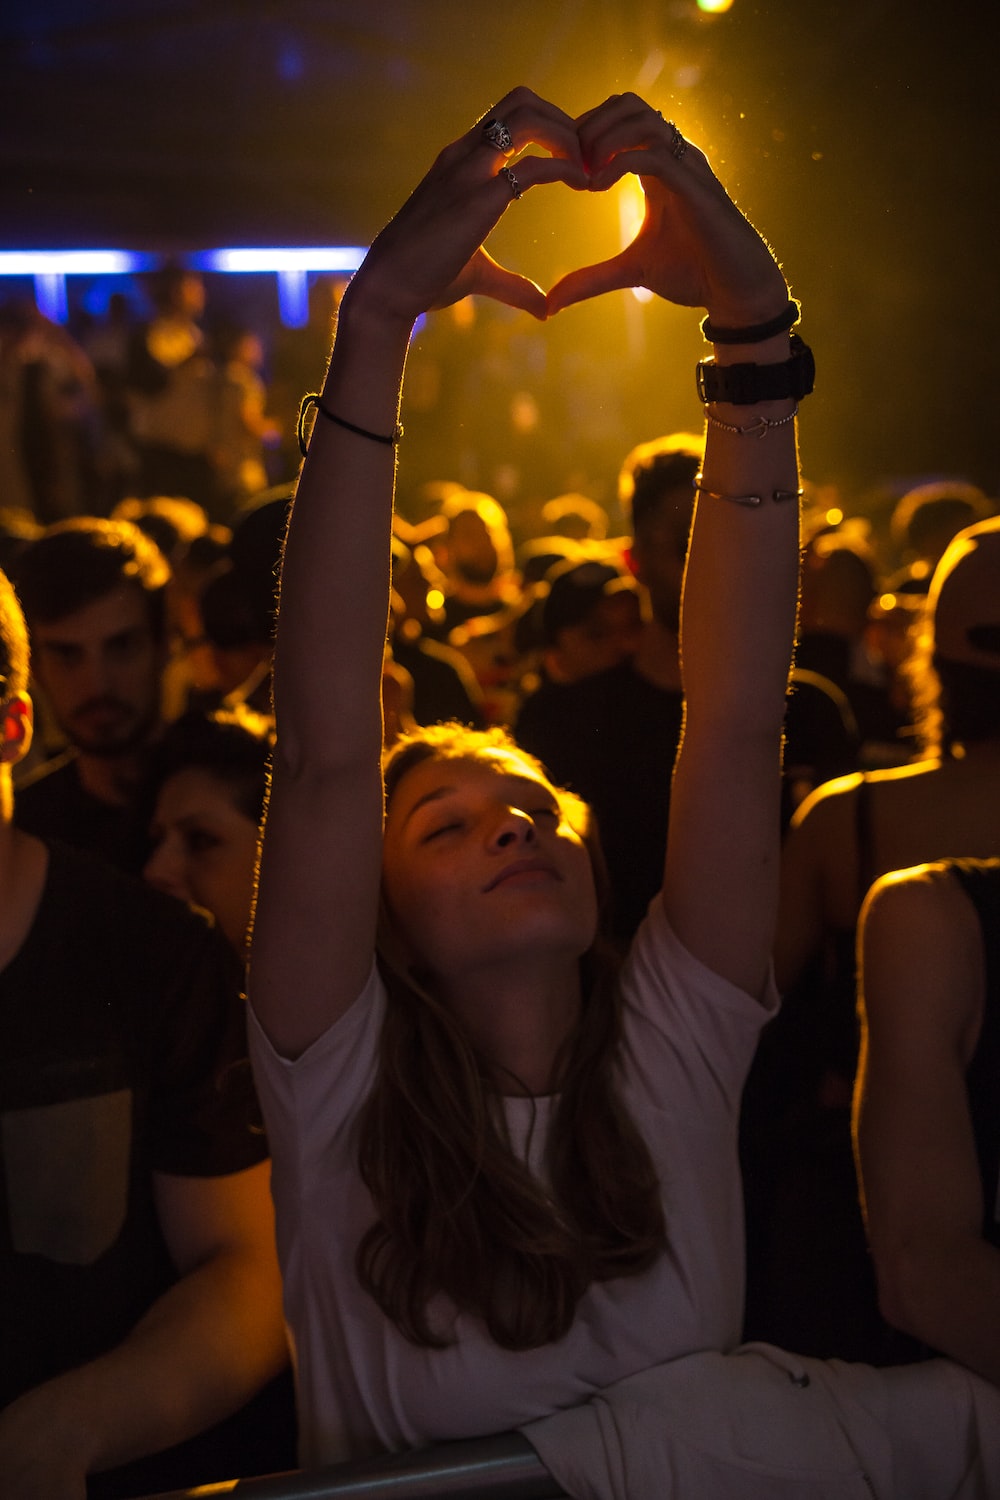 woman at crowd raising her hand while making heart sign